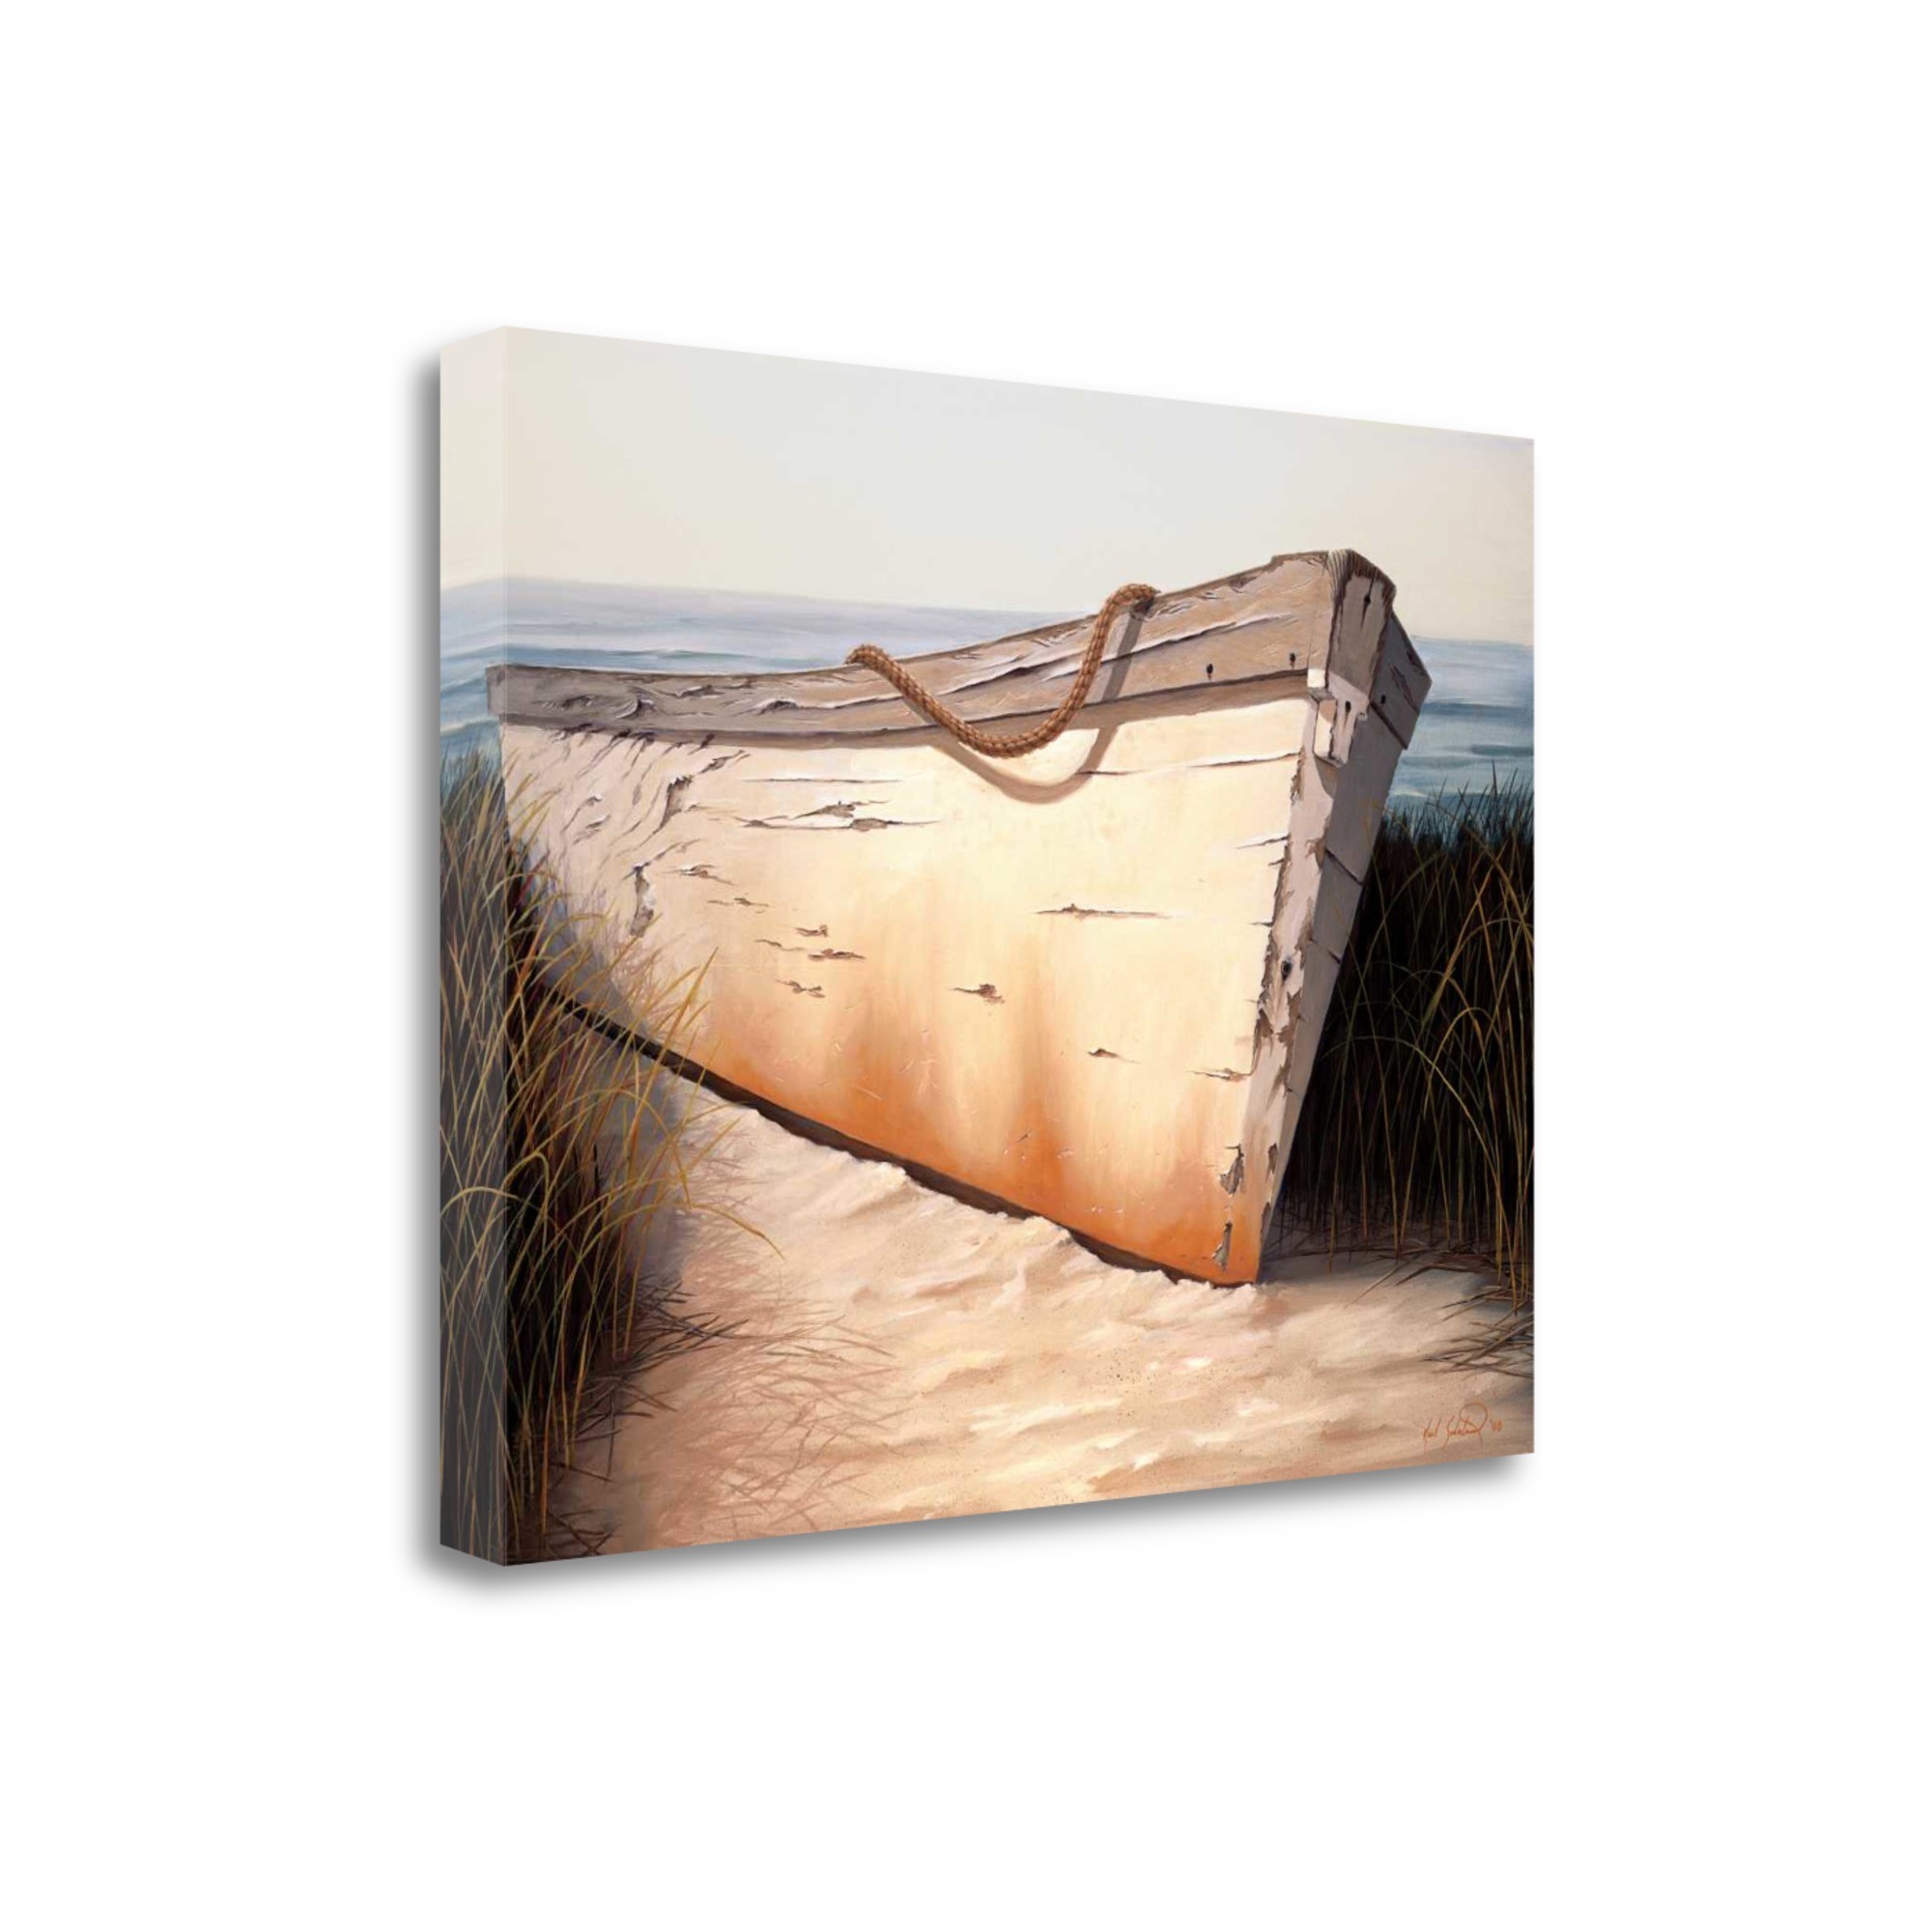 45" Old Fishing Boat On White Sands Giclee Wrap Canvas Wall Art